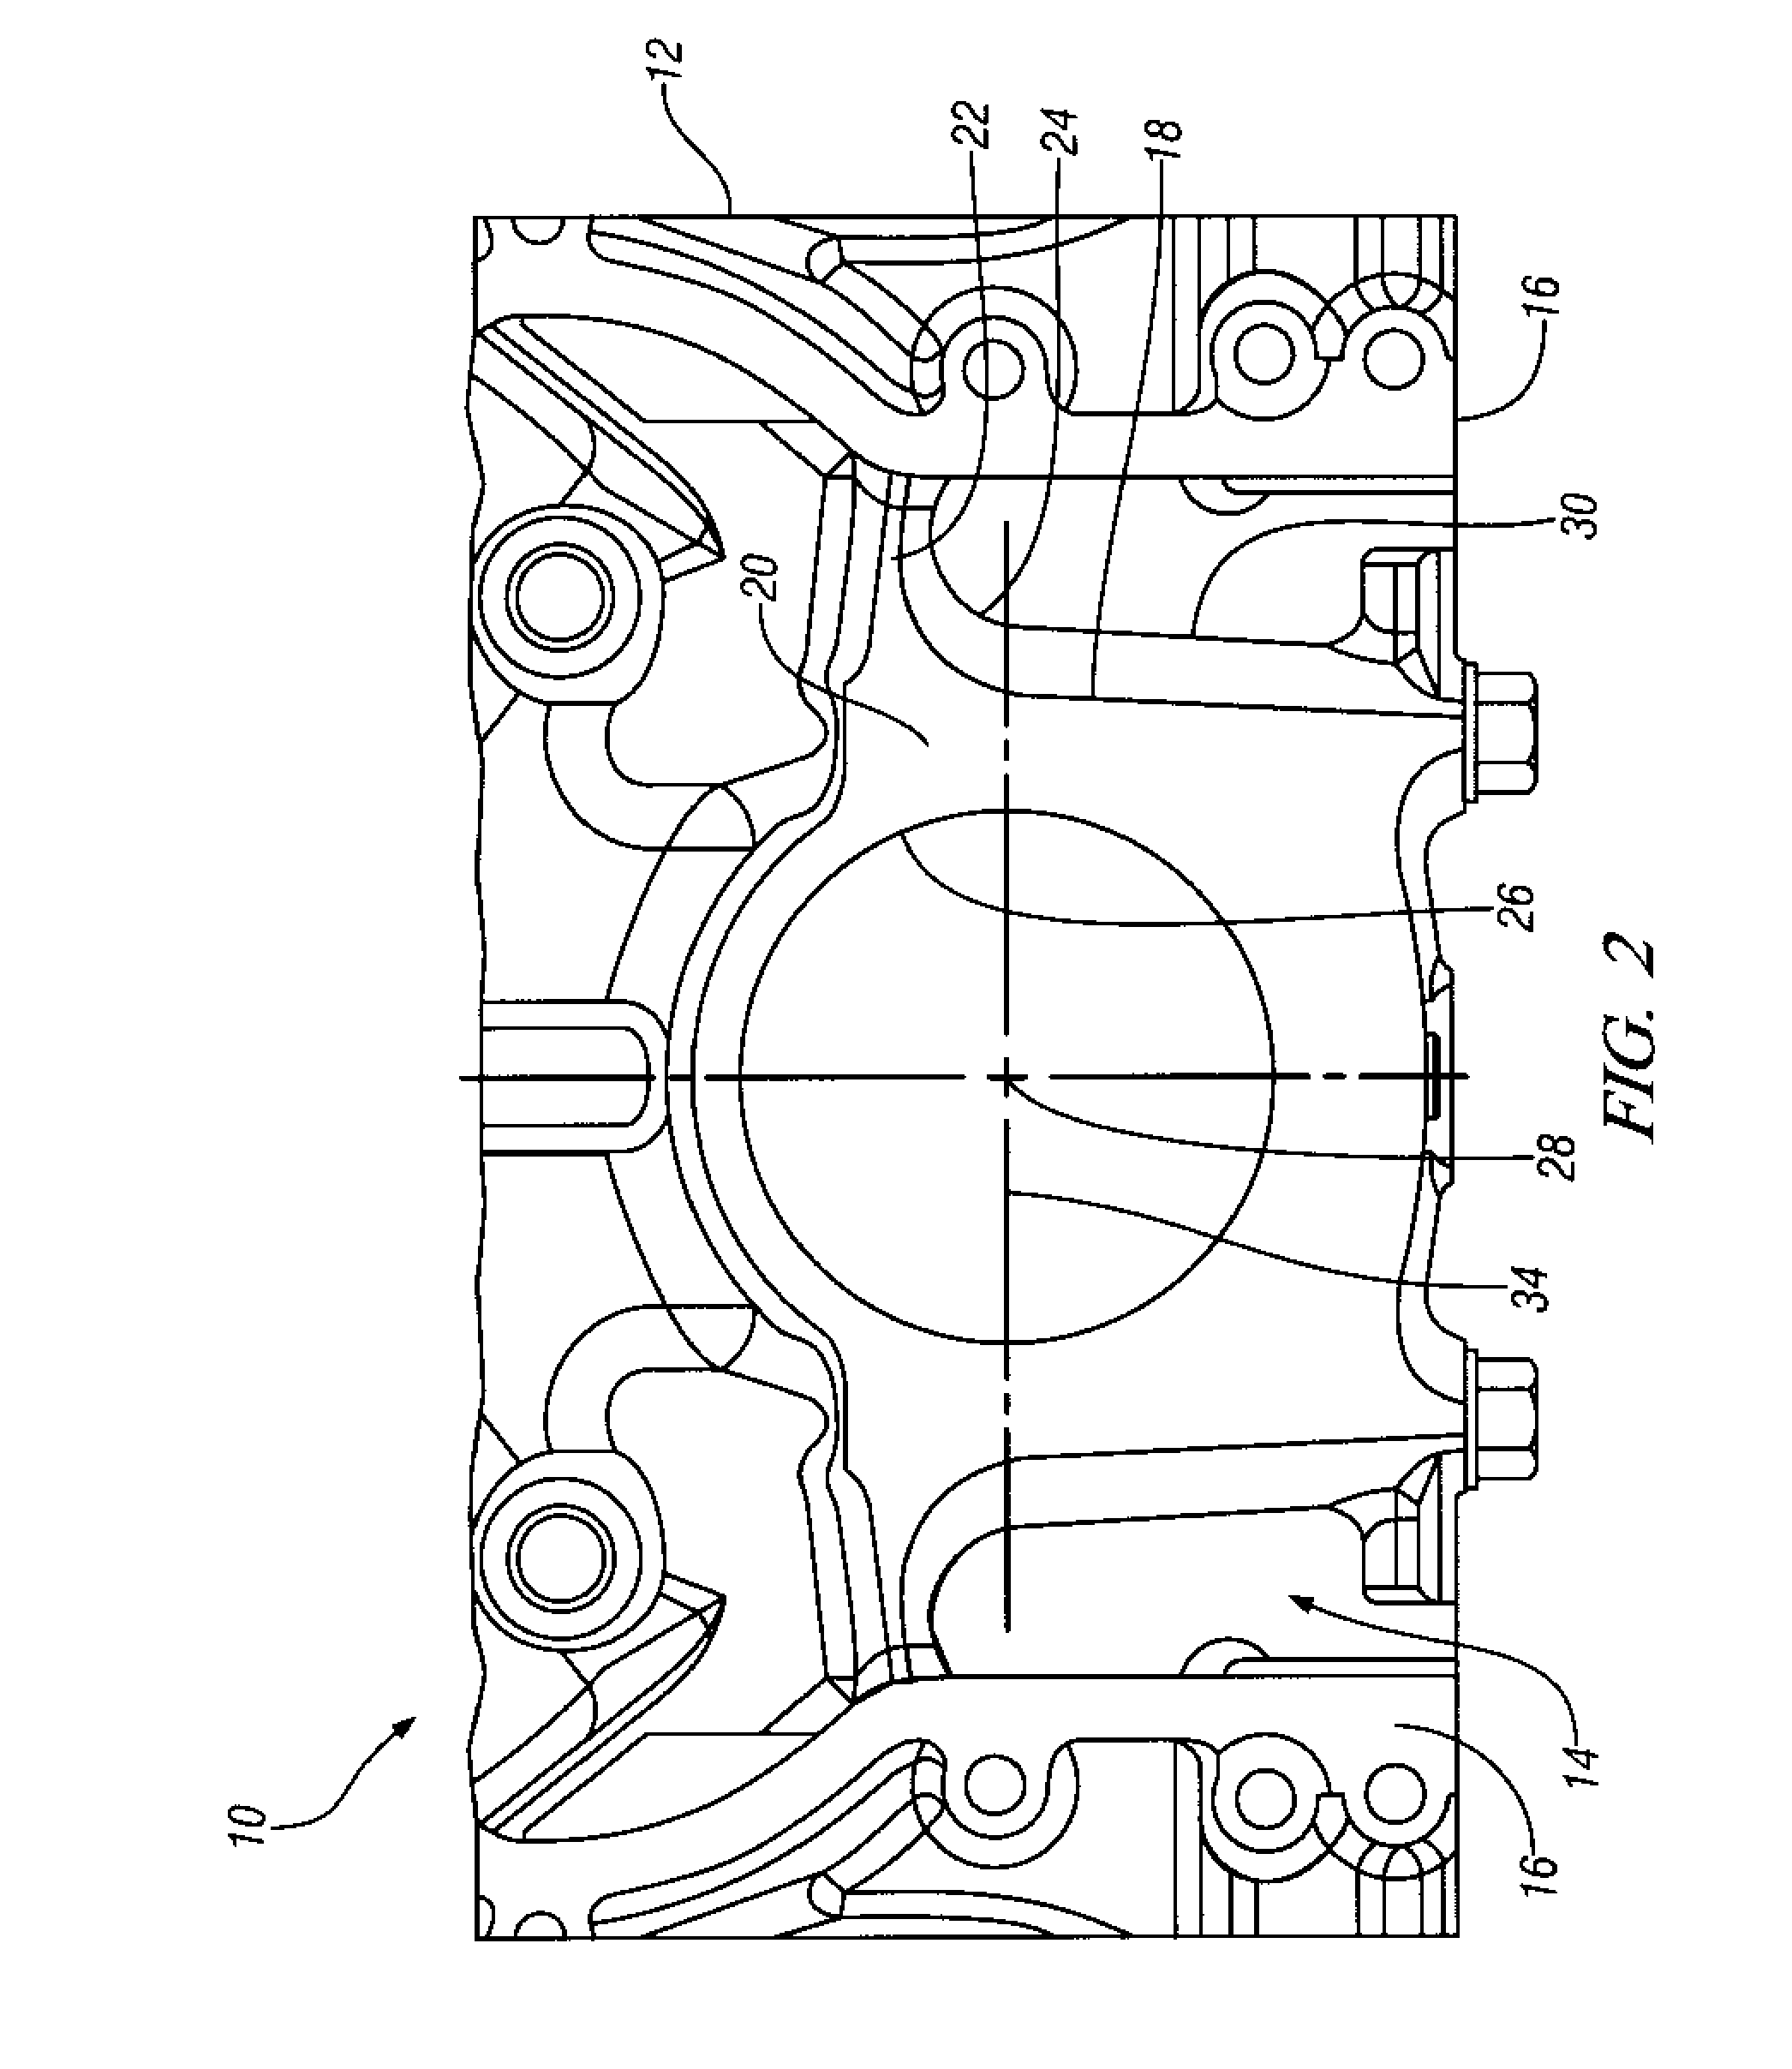 Engine and method for improved crankcase fatigue strength with fracture-split main bearing caps